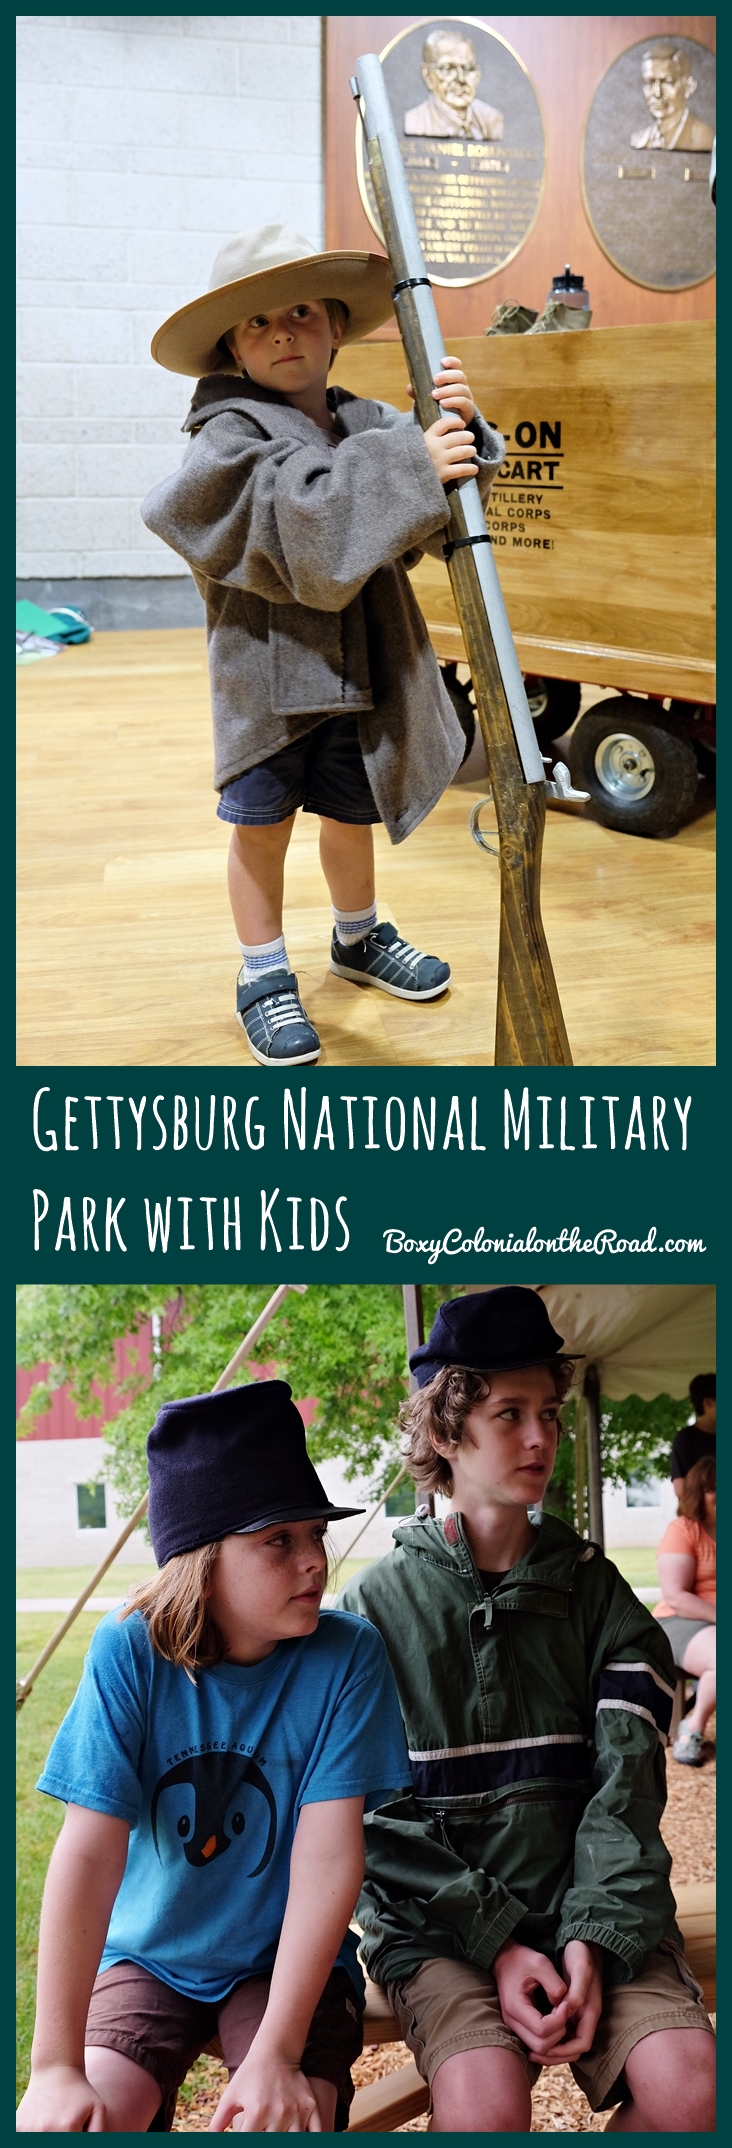 Two days in Gettysbury National Military Park with kids